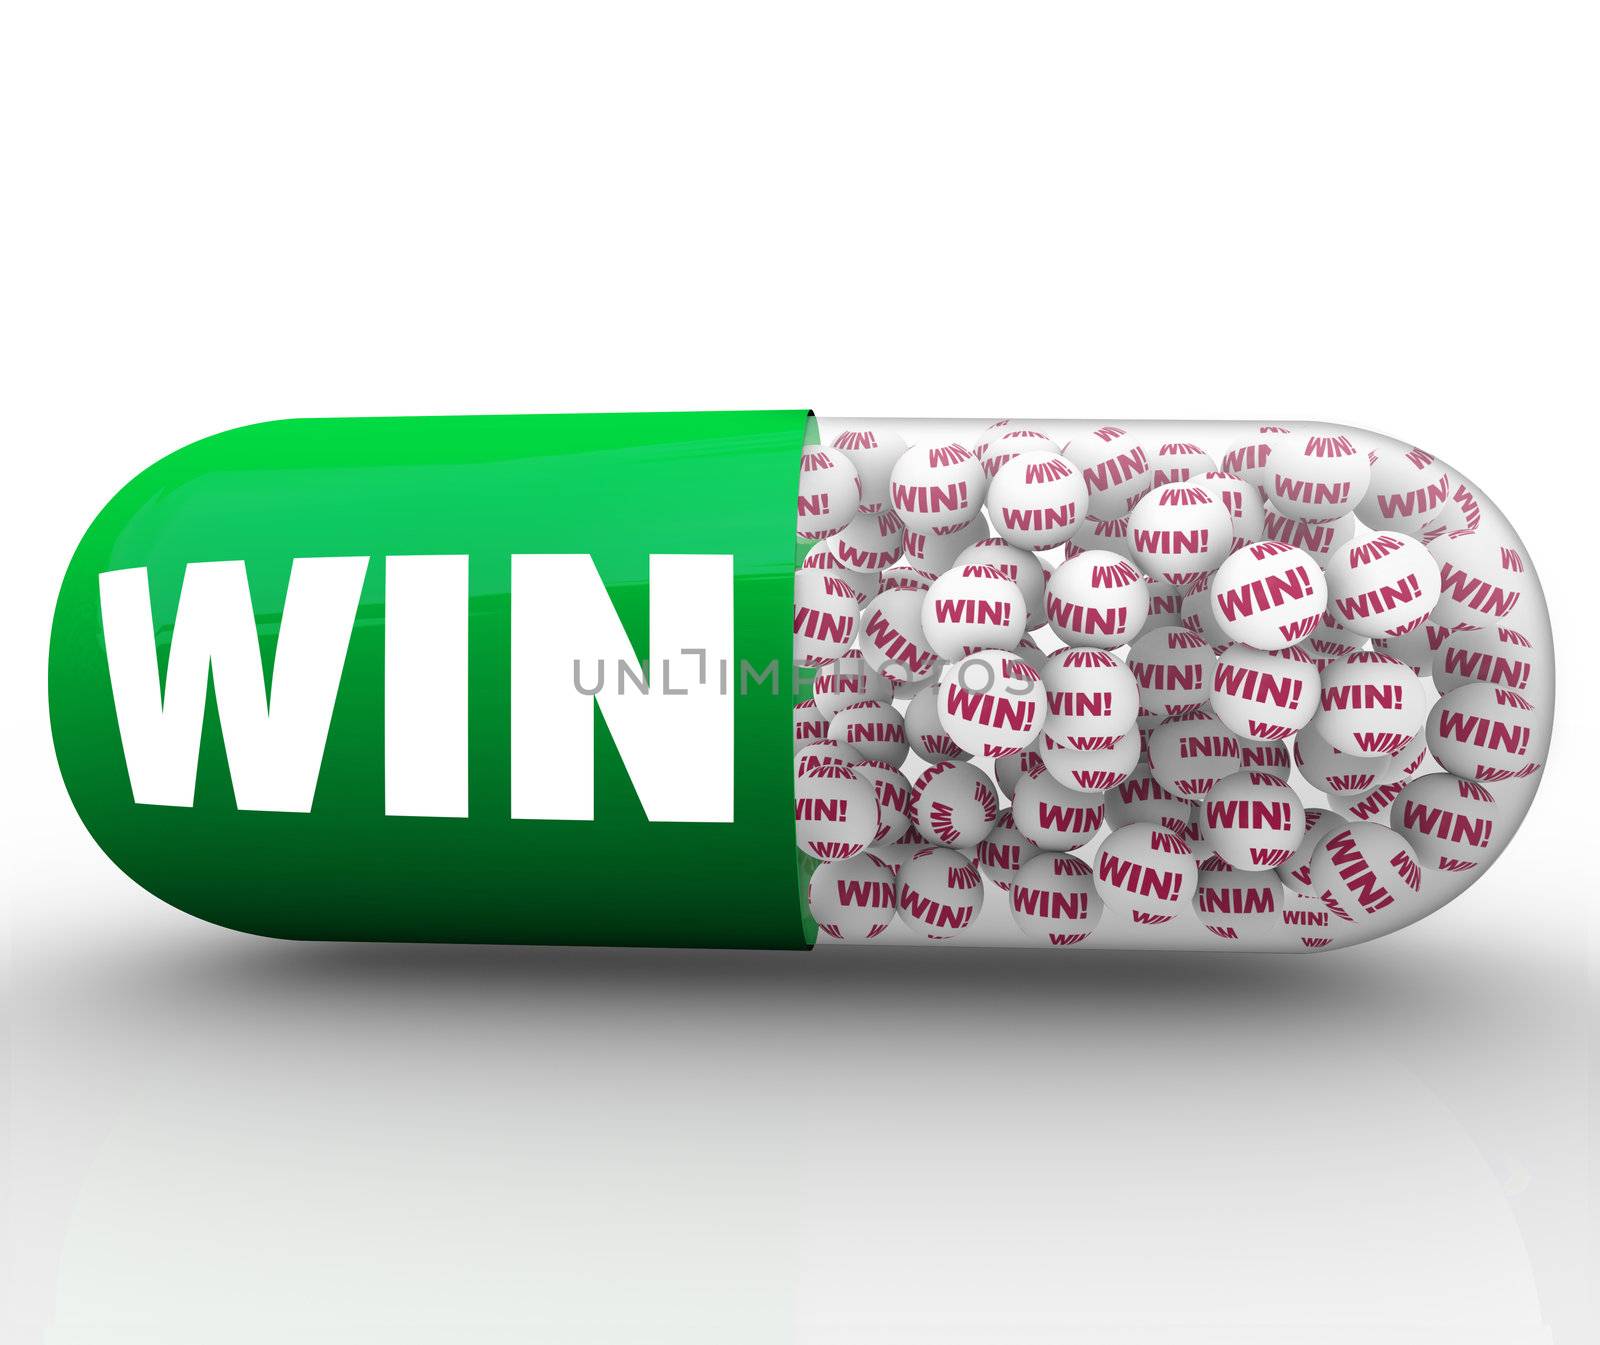 A green capsule pill with the word Win on tiny balls inside representing instant success, finding the right solution to be a winner, or using steroids to cheat in a game or competition